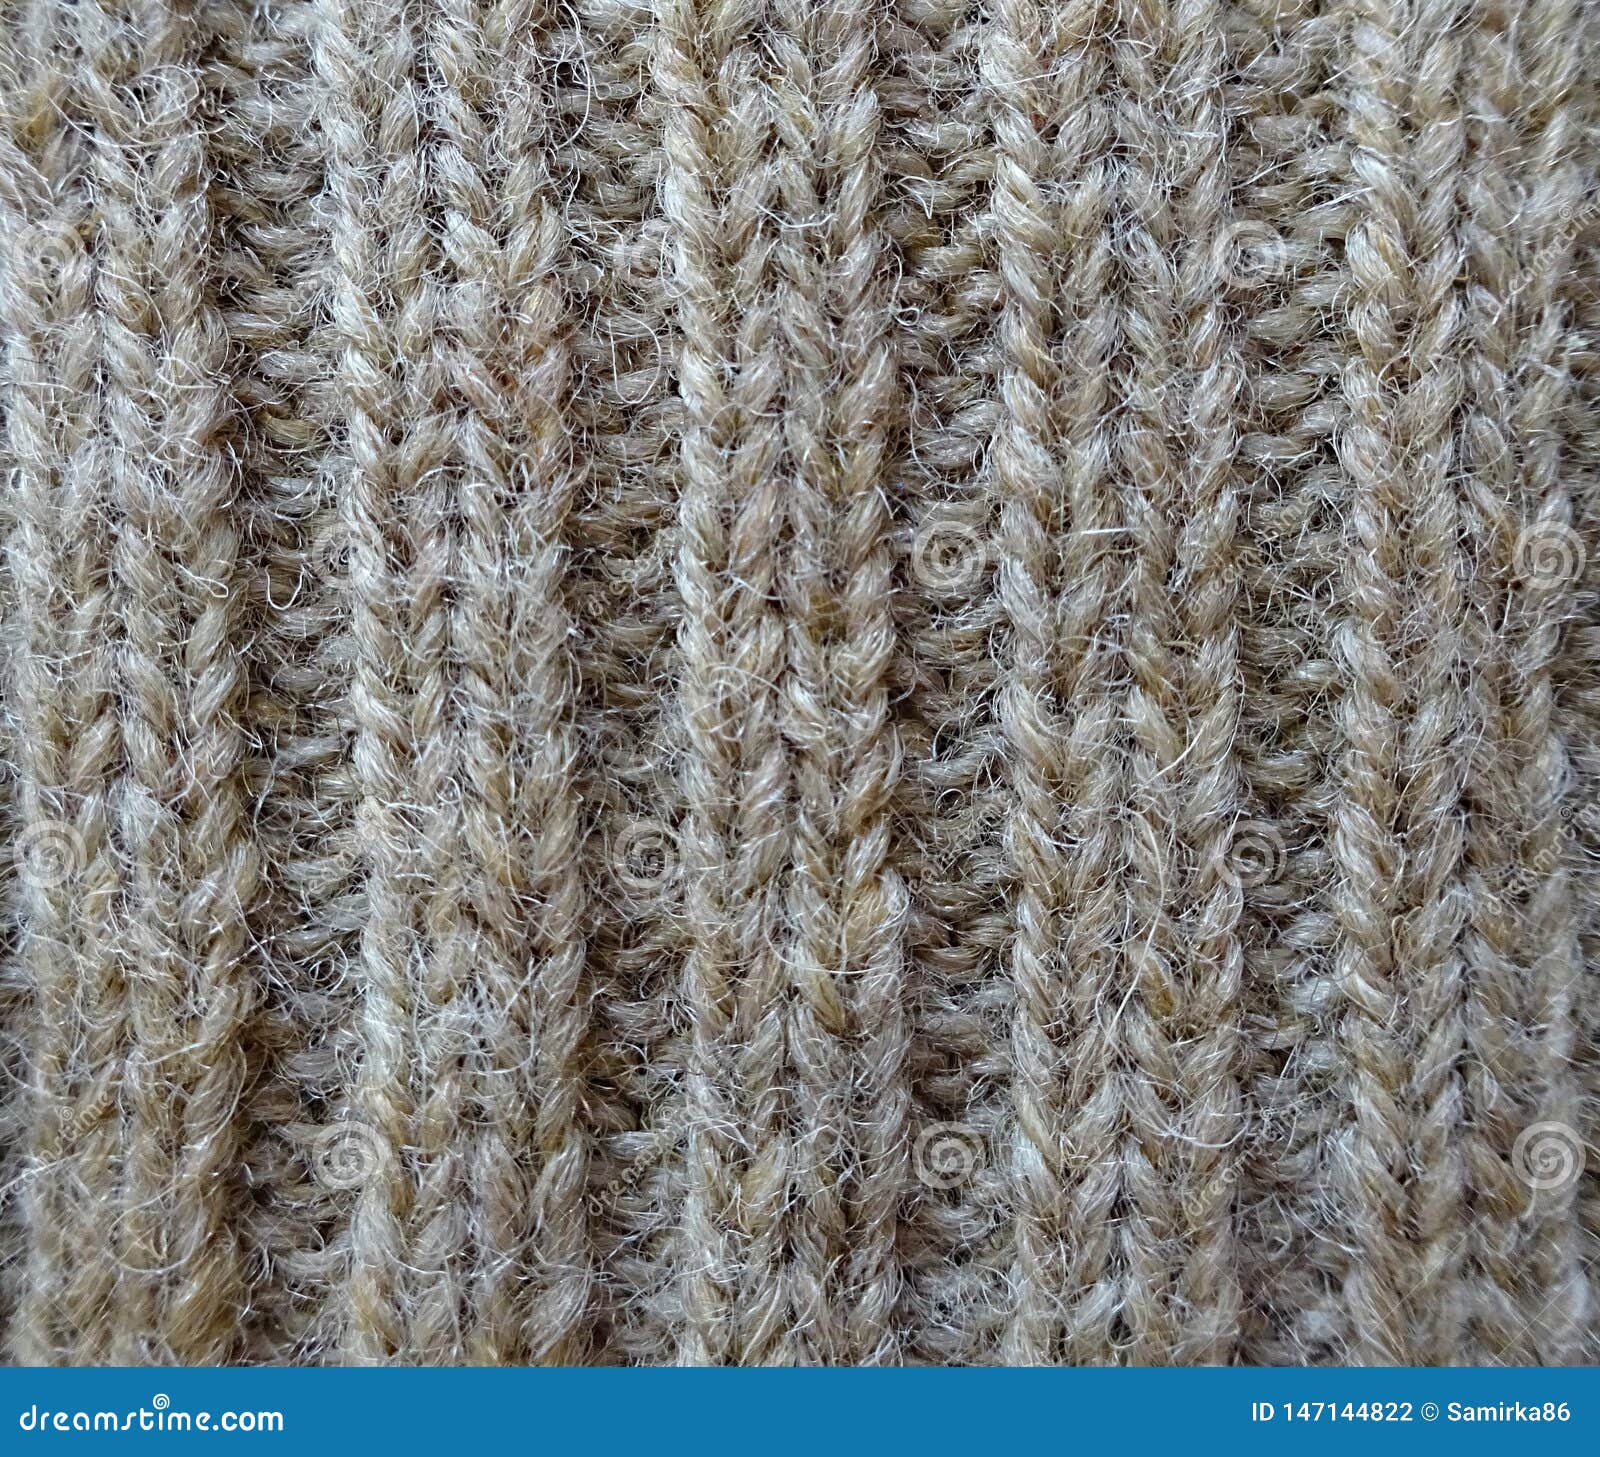 Knitting Wool Textile Fabric Texture Surface Stock Photo